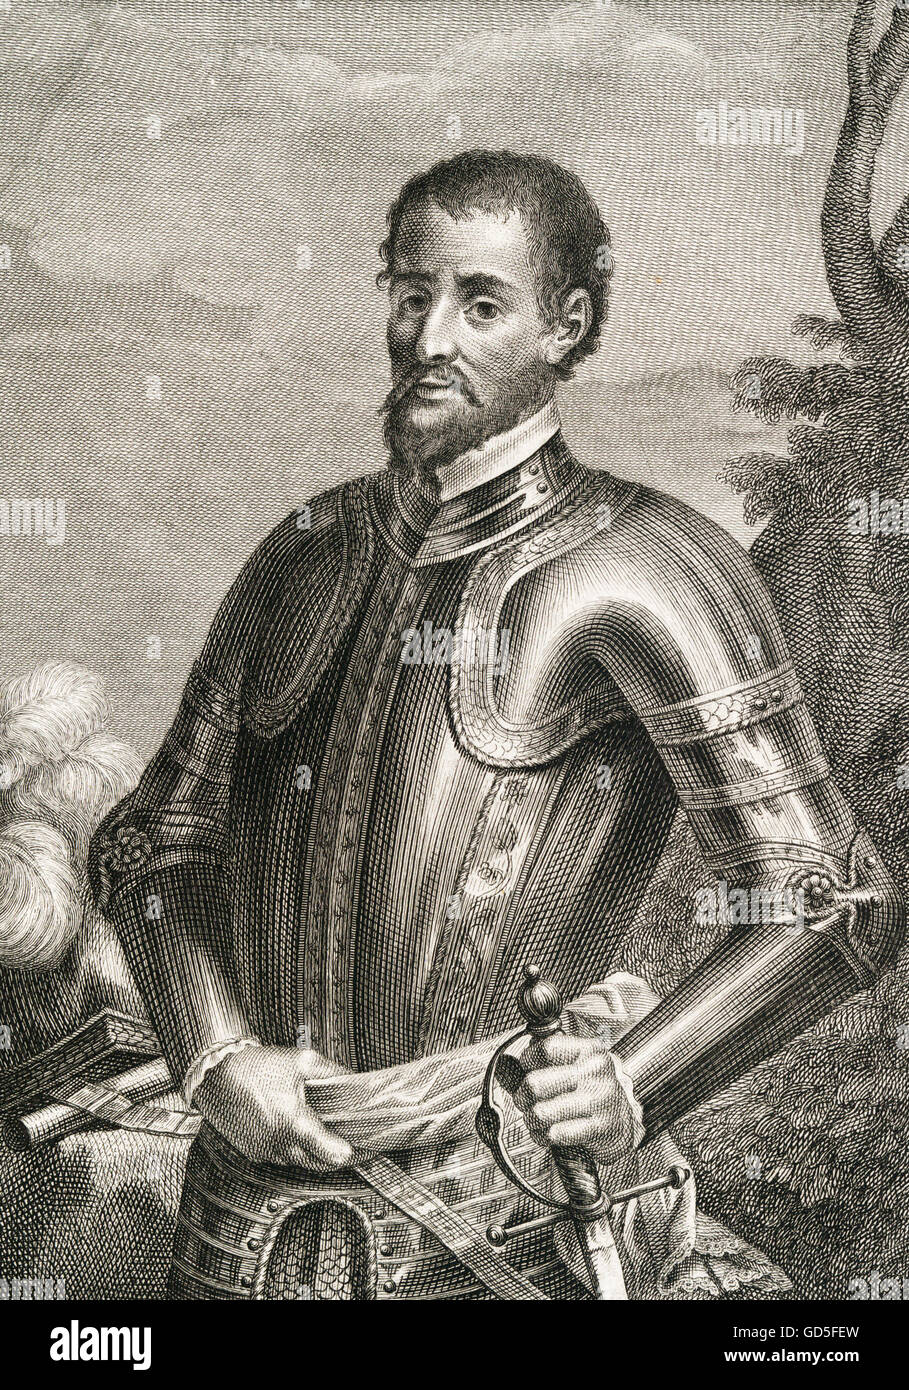 Hernando de Soto (c. 1500-1542), a Spanish explorer and conquistador who led the first European expedition into what is now the United States. Portrait by Jose Maea, 1791. Stock Photo